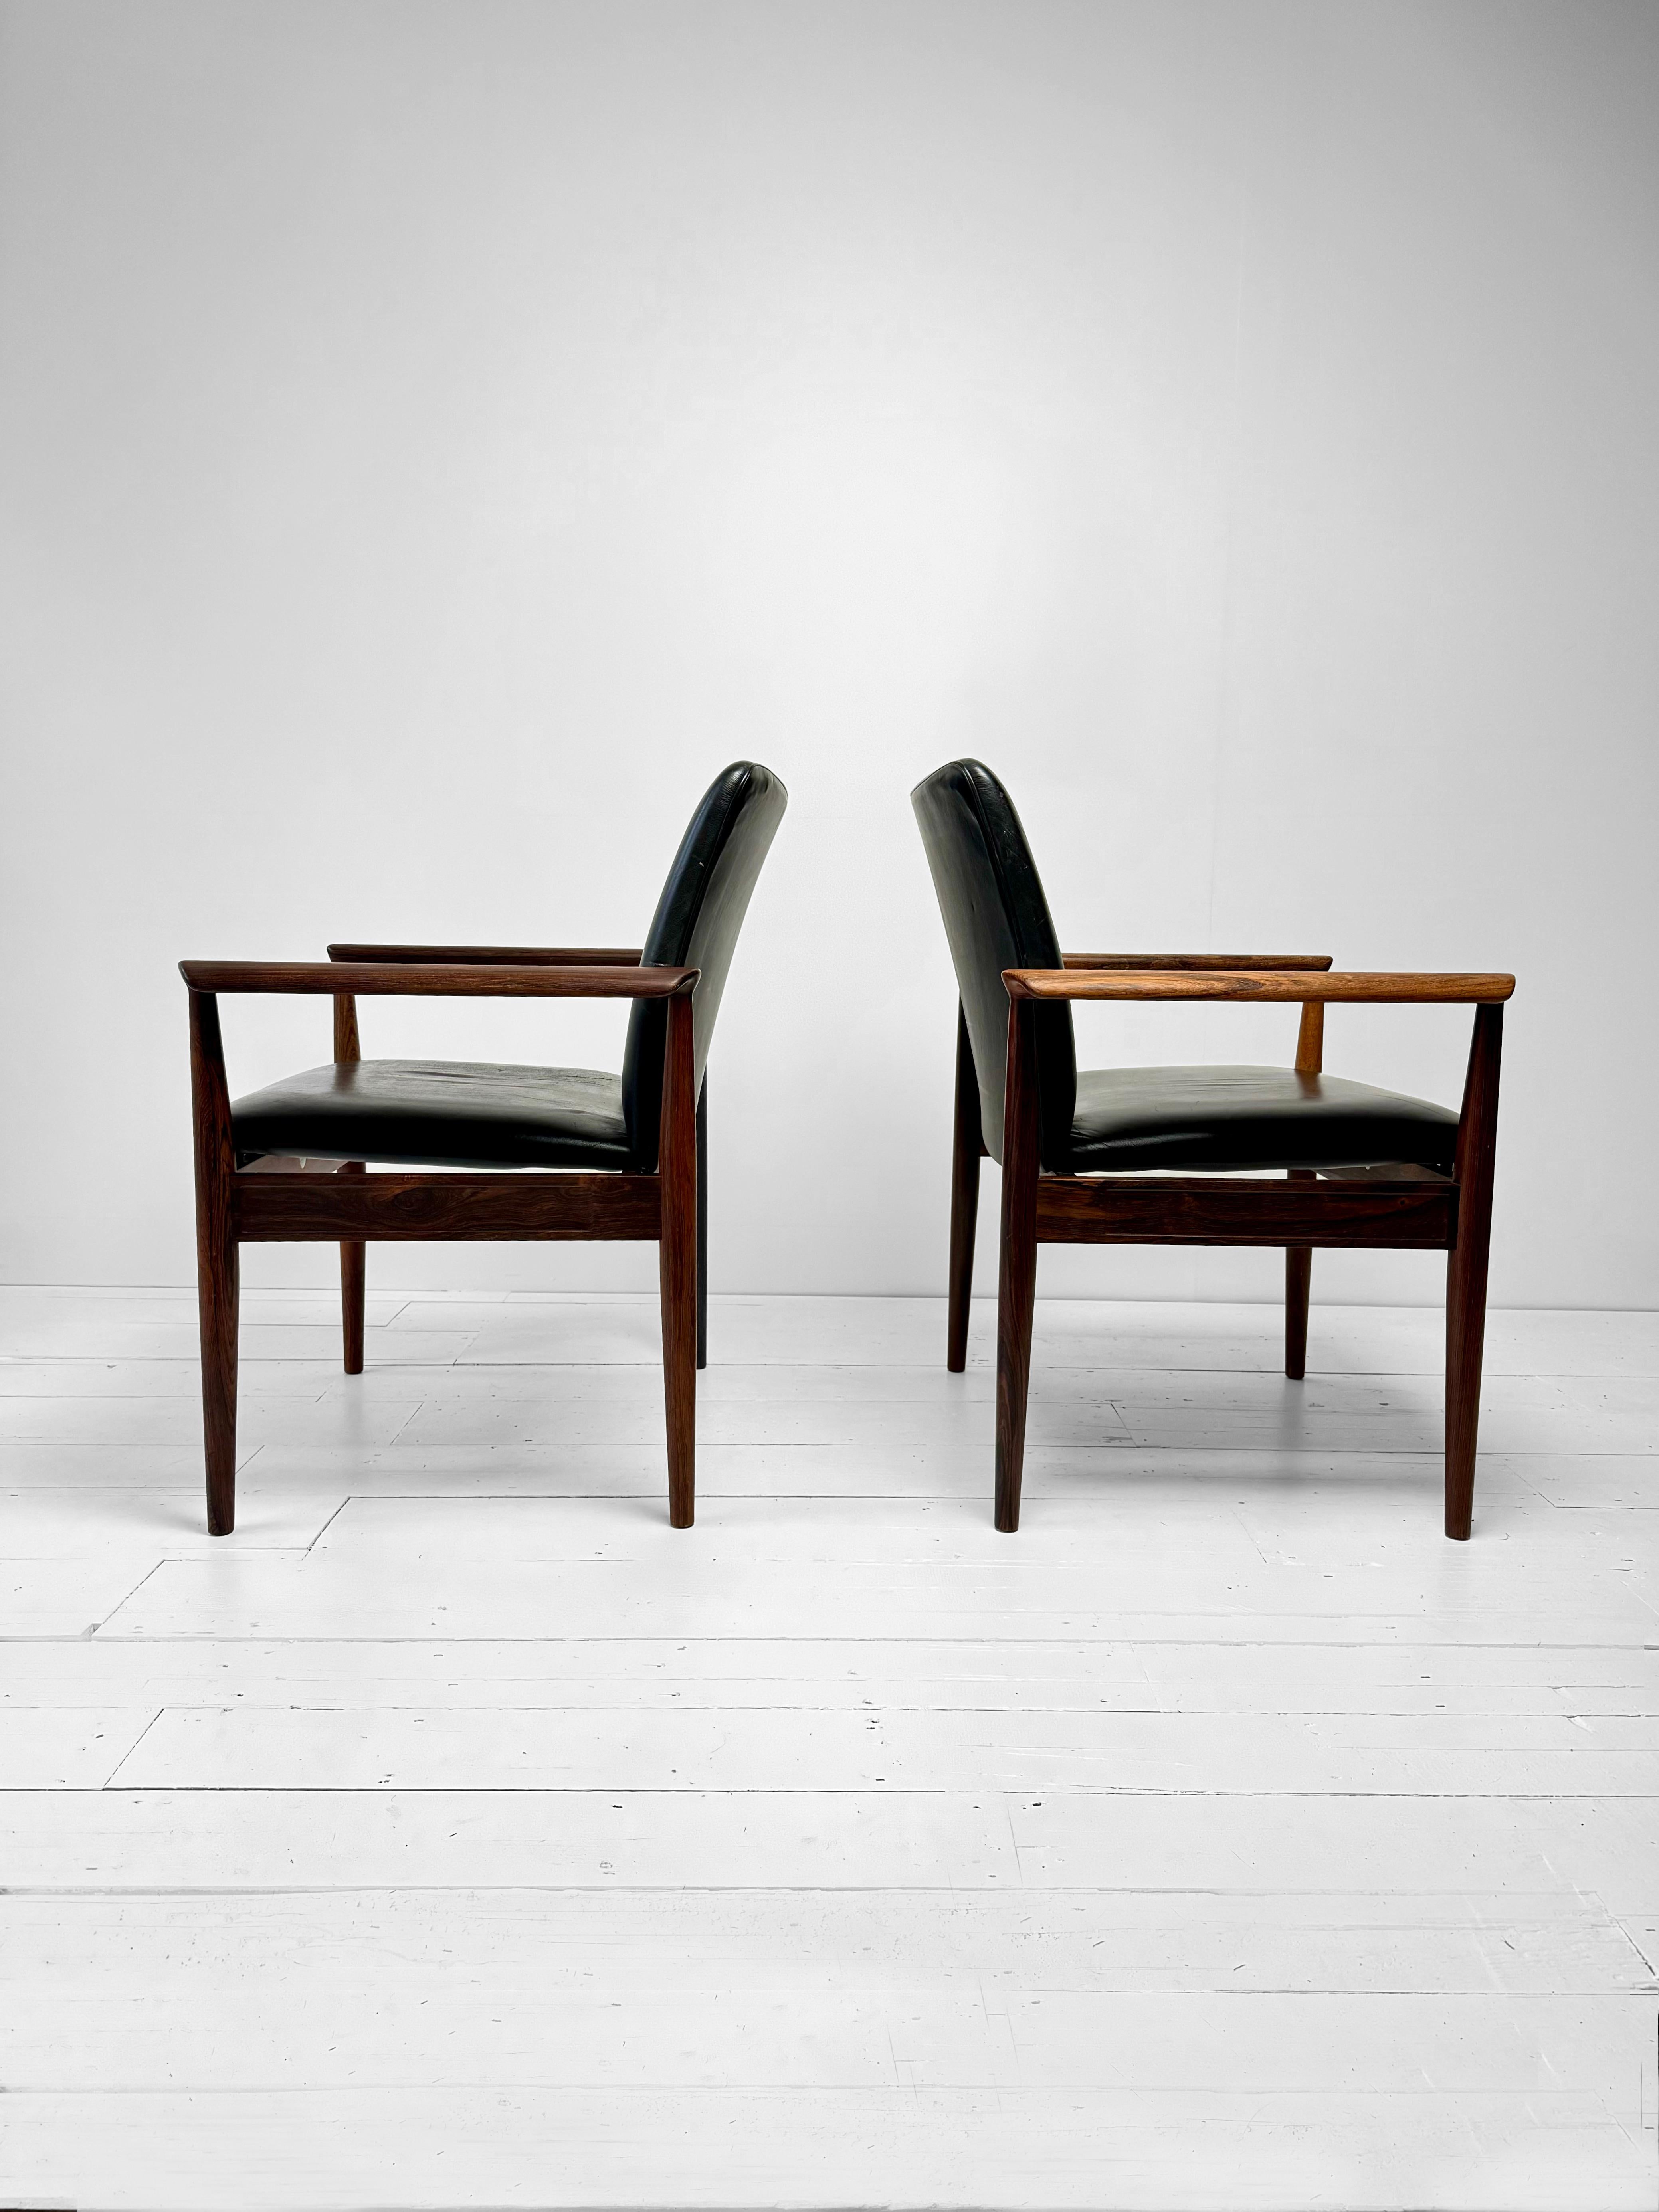 Danish Set of Diplomat Armchairs in Rosewood and Leather by Finn Juhl, Denmark c.1960's For Sale